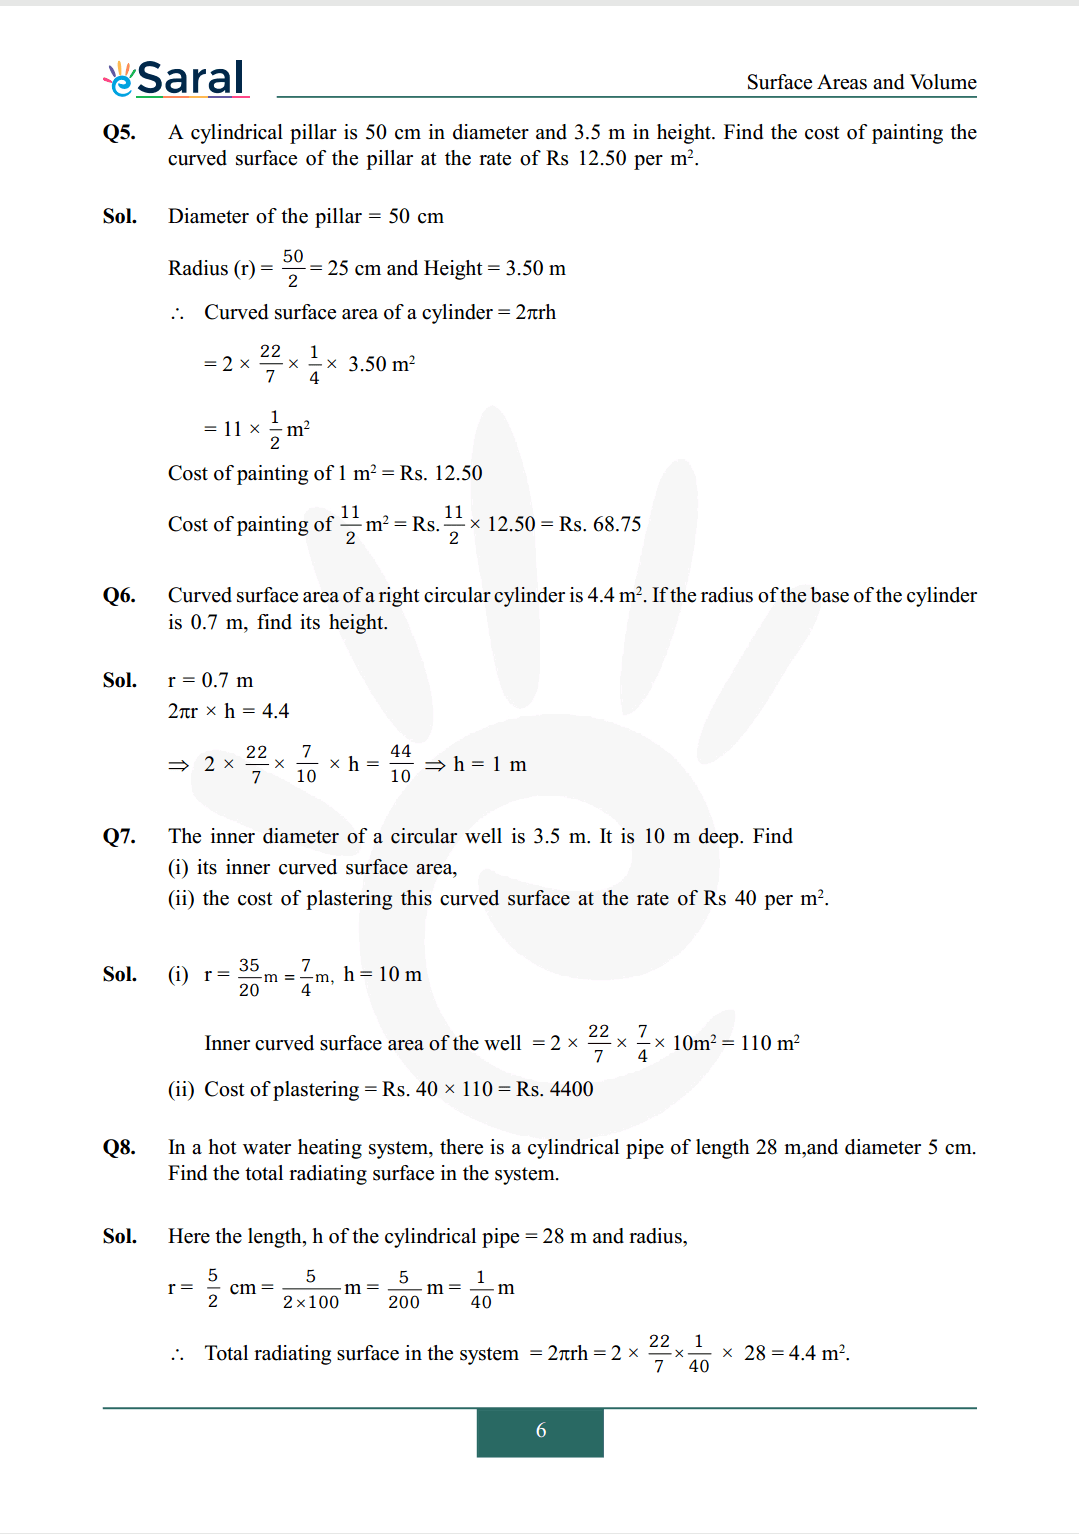 Class 9 maths chapter 13 exercise 13.2 solutions Image 3